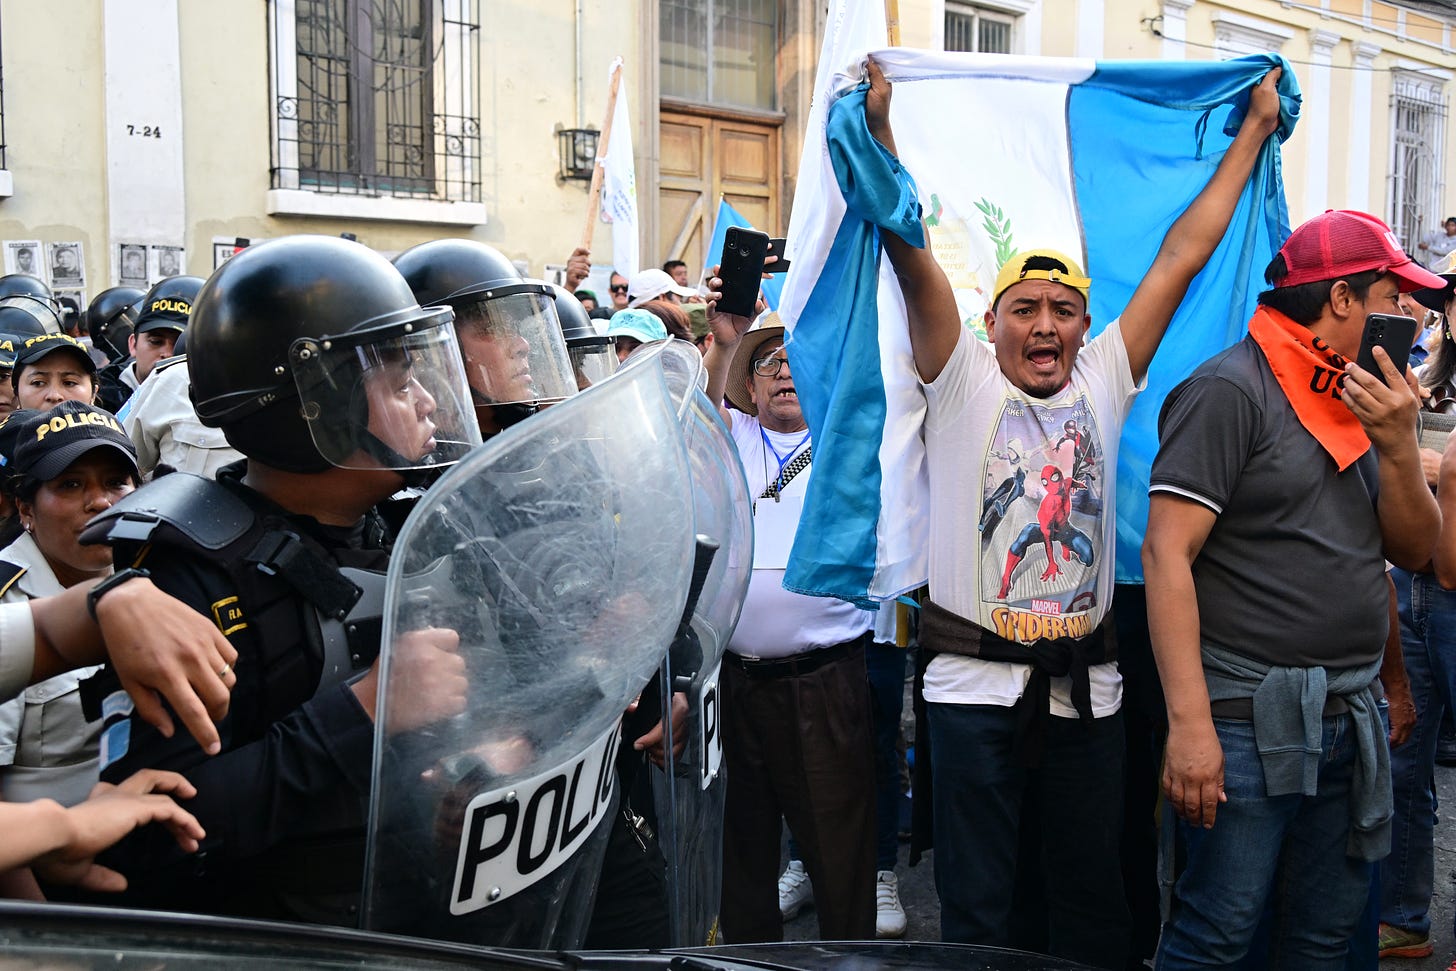 Supporters of Bernardo Arevalo demonstrate outside Congress over the weekend. (Photo by Martin Bernetti/AFP via Getty Images.)